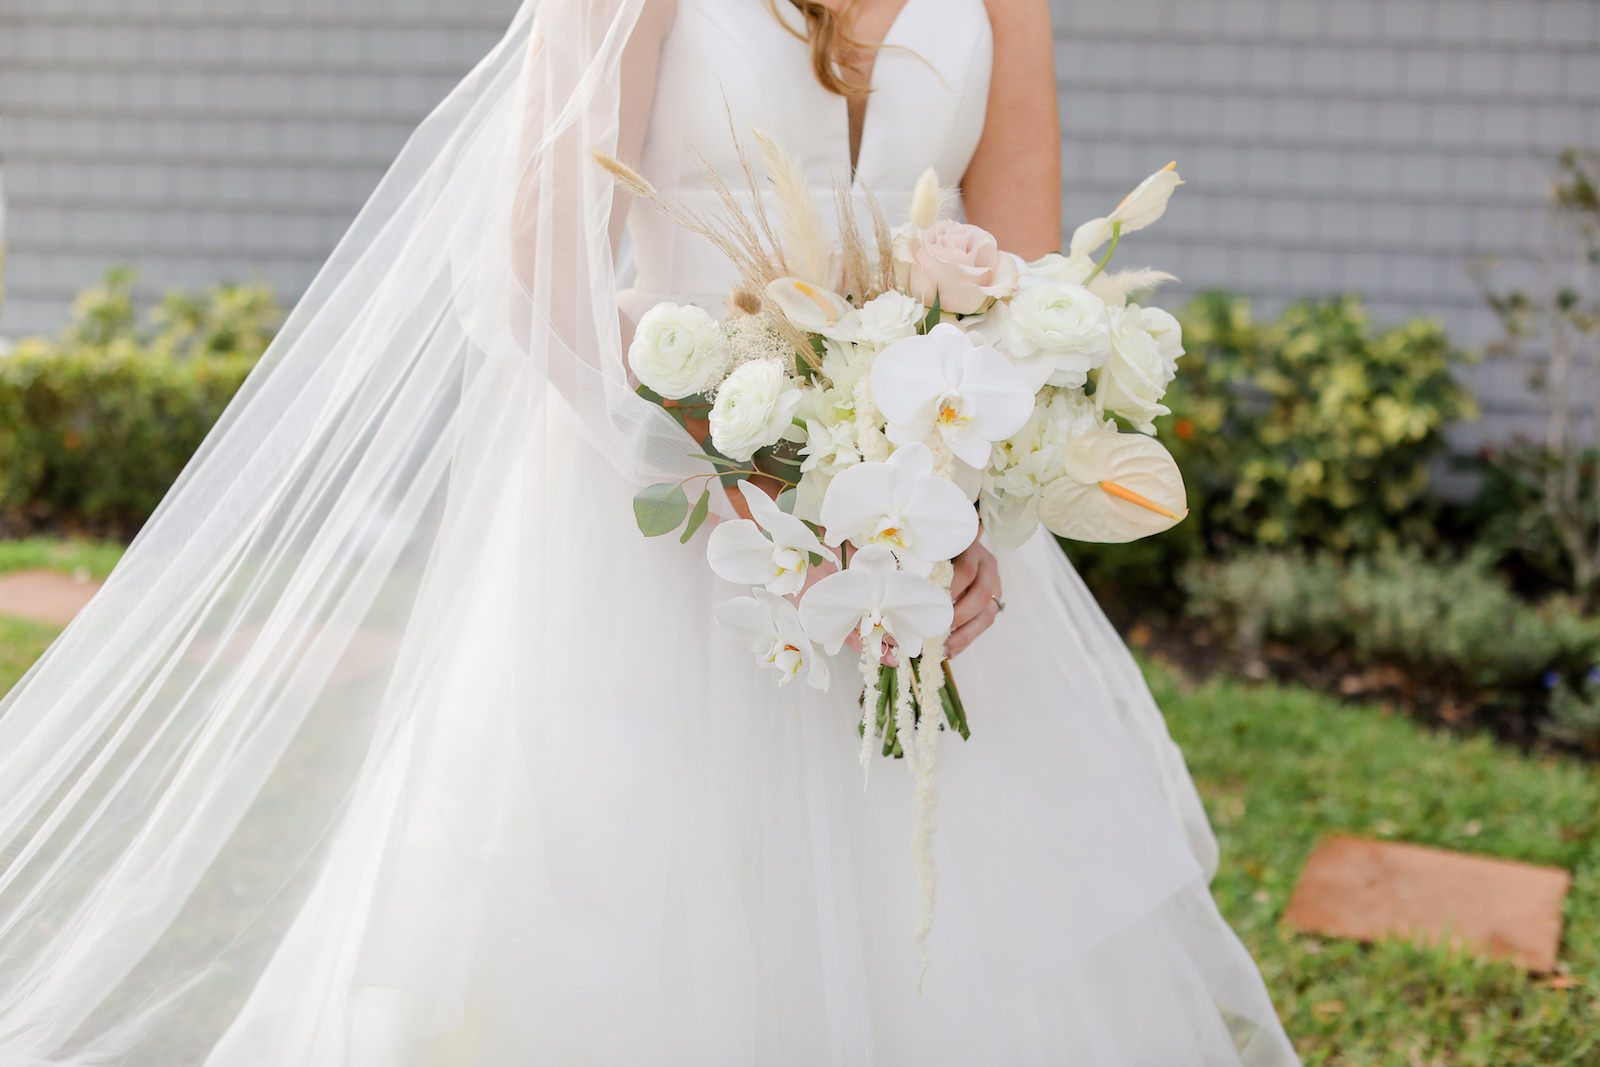 Romantic Blue Coastal Chic Wedding, Bride Holding White Orchids, Blush Pink and White Roses, Anthurium, Hanging Amaranthus, Pampas Grass Floral Bouquet | Tampa Bay Wedding Photographer Lifelong Photography Studio